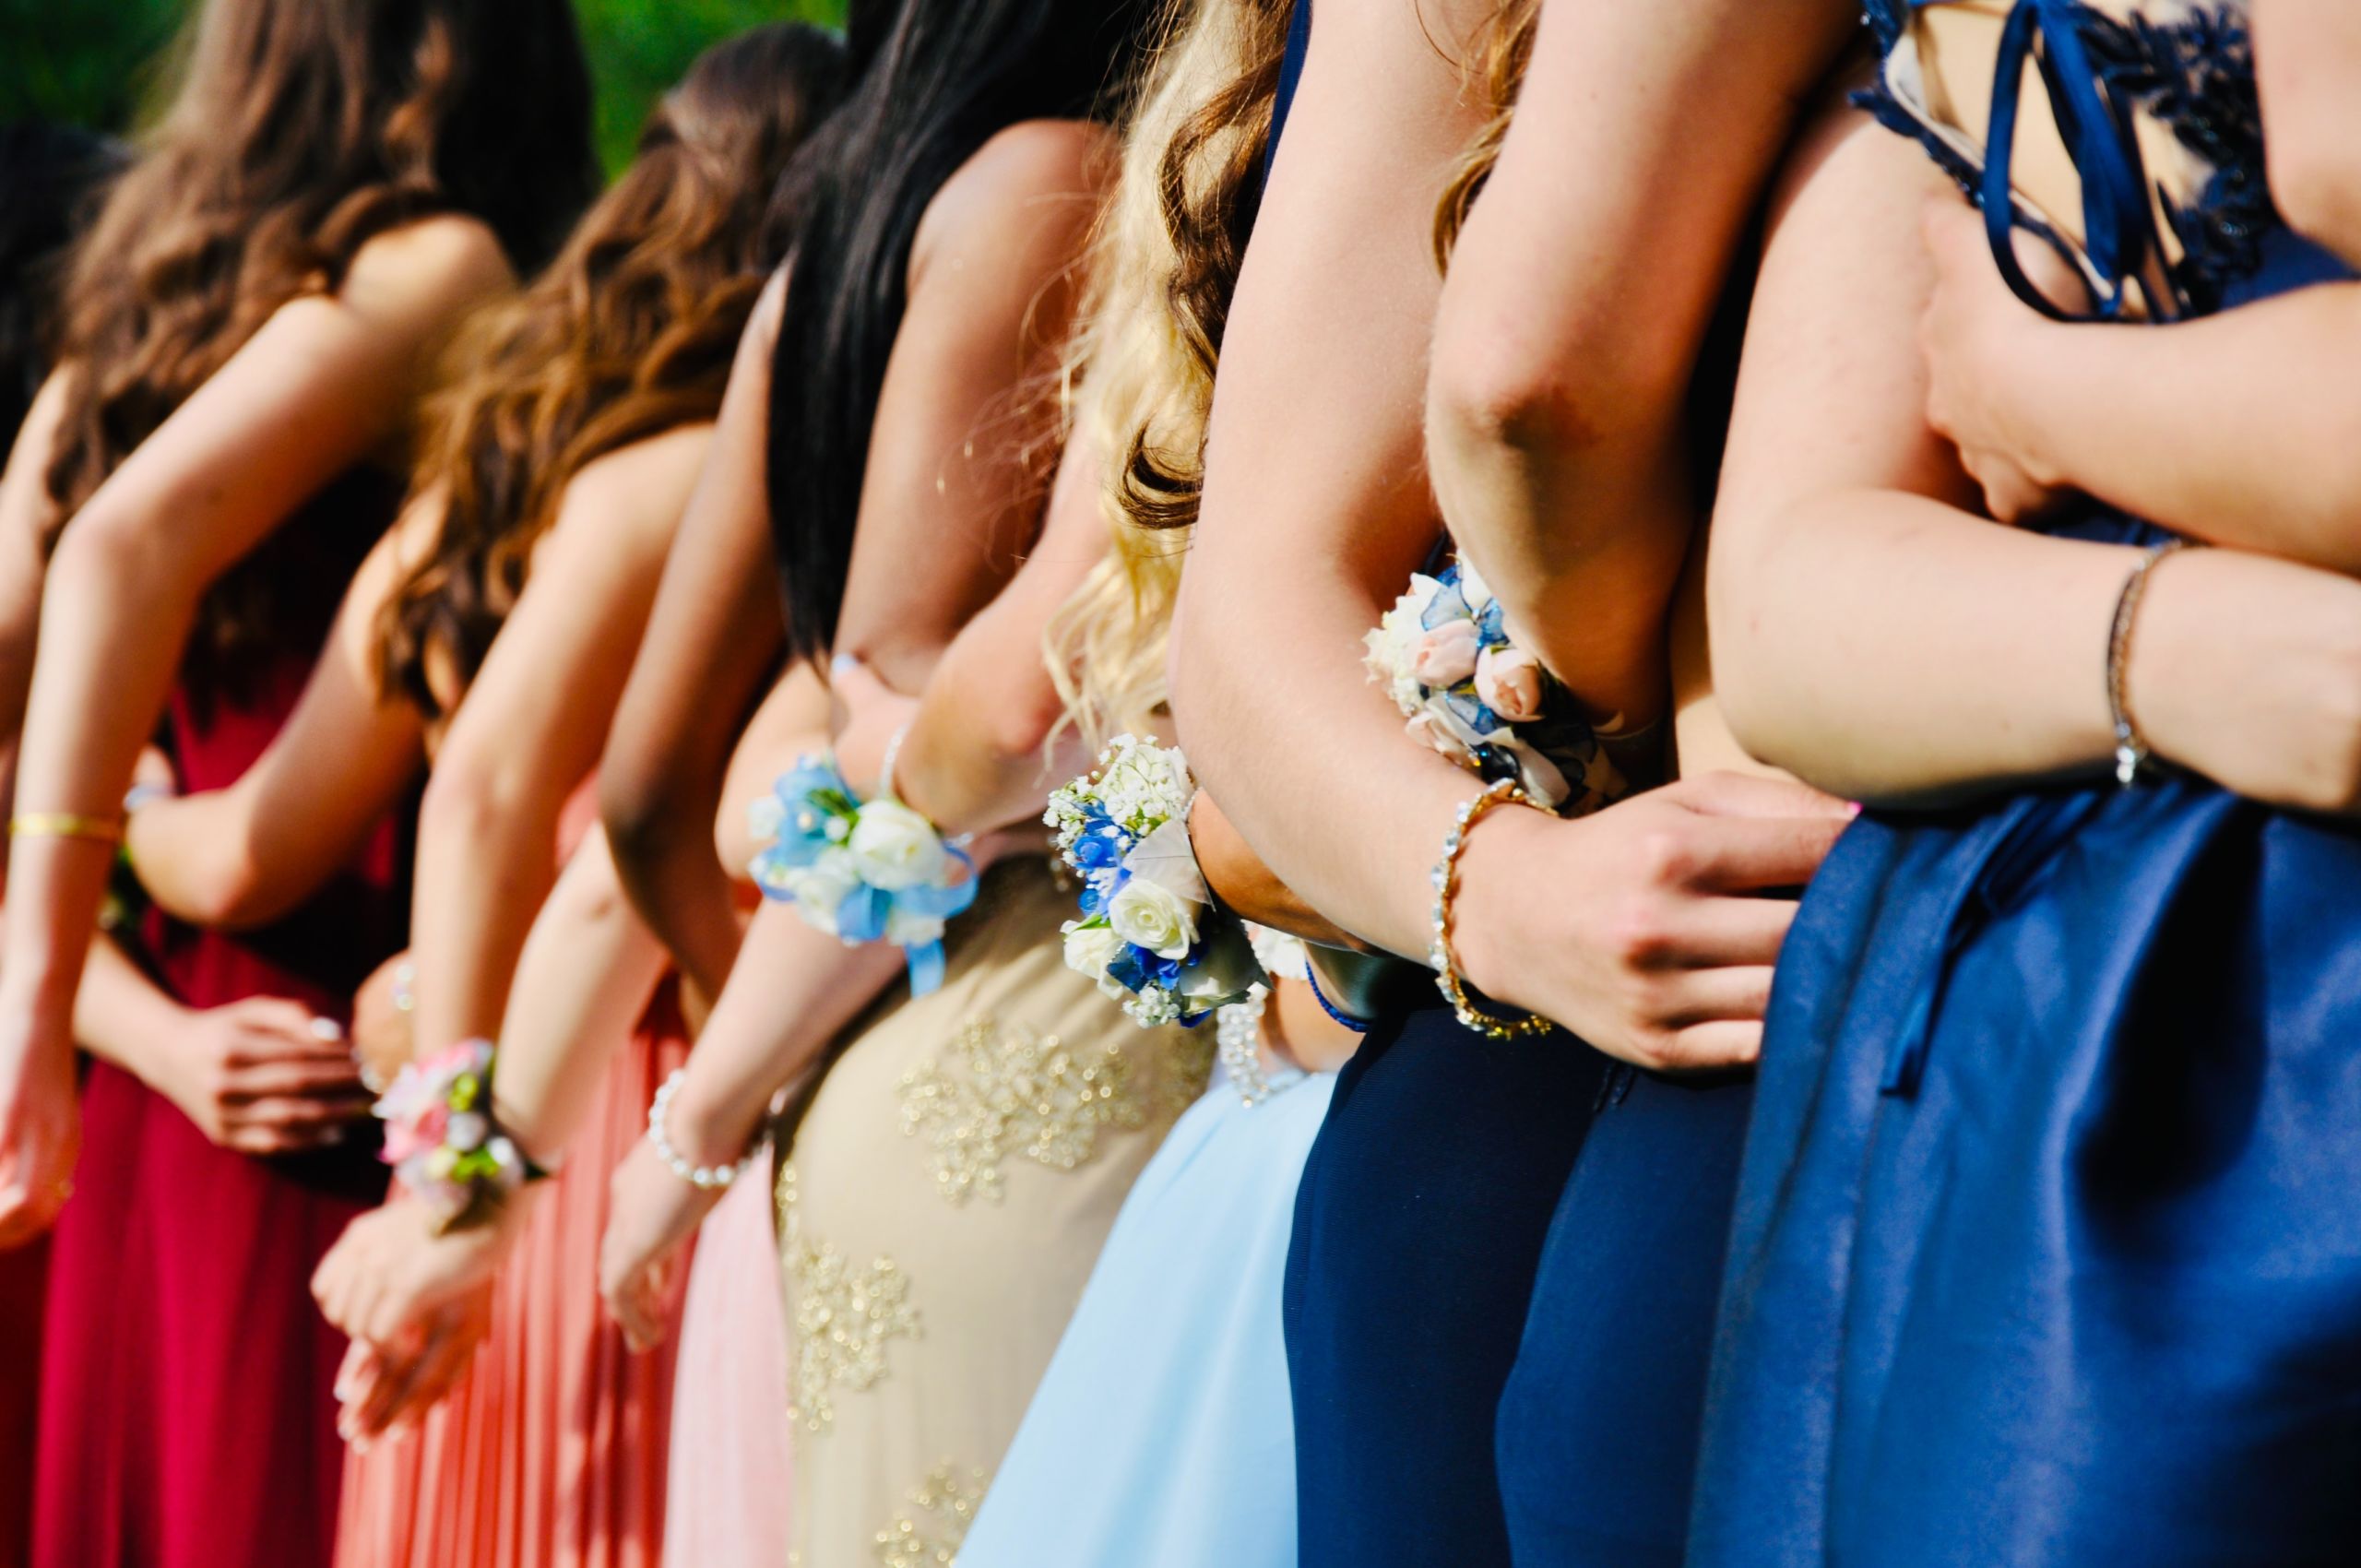 The photo depicts a group of girls posing for a photo in prom dresses.